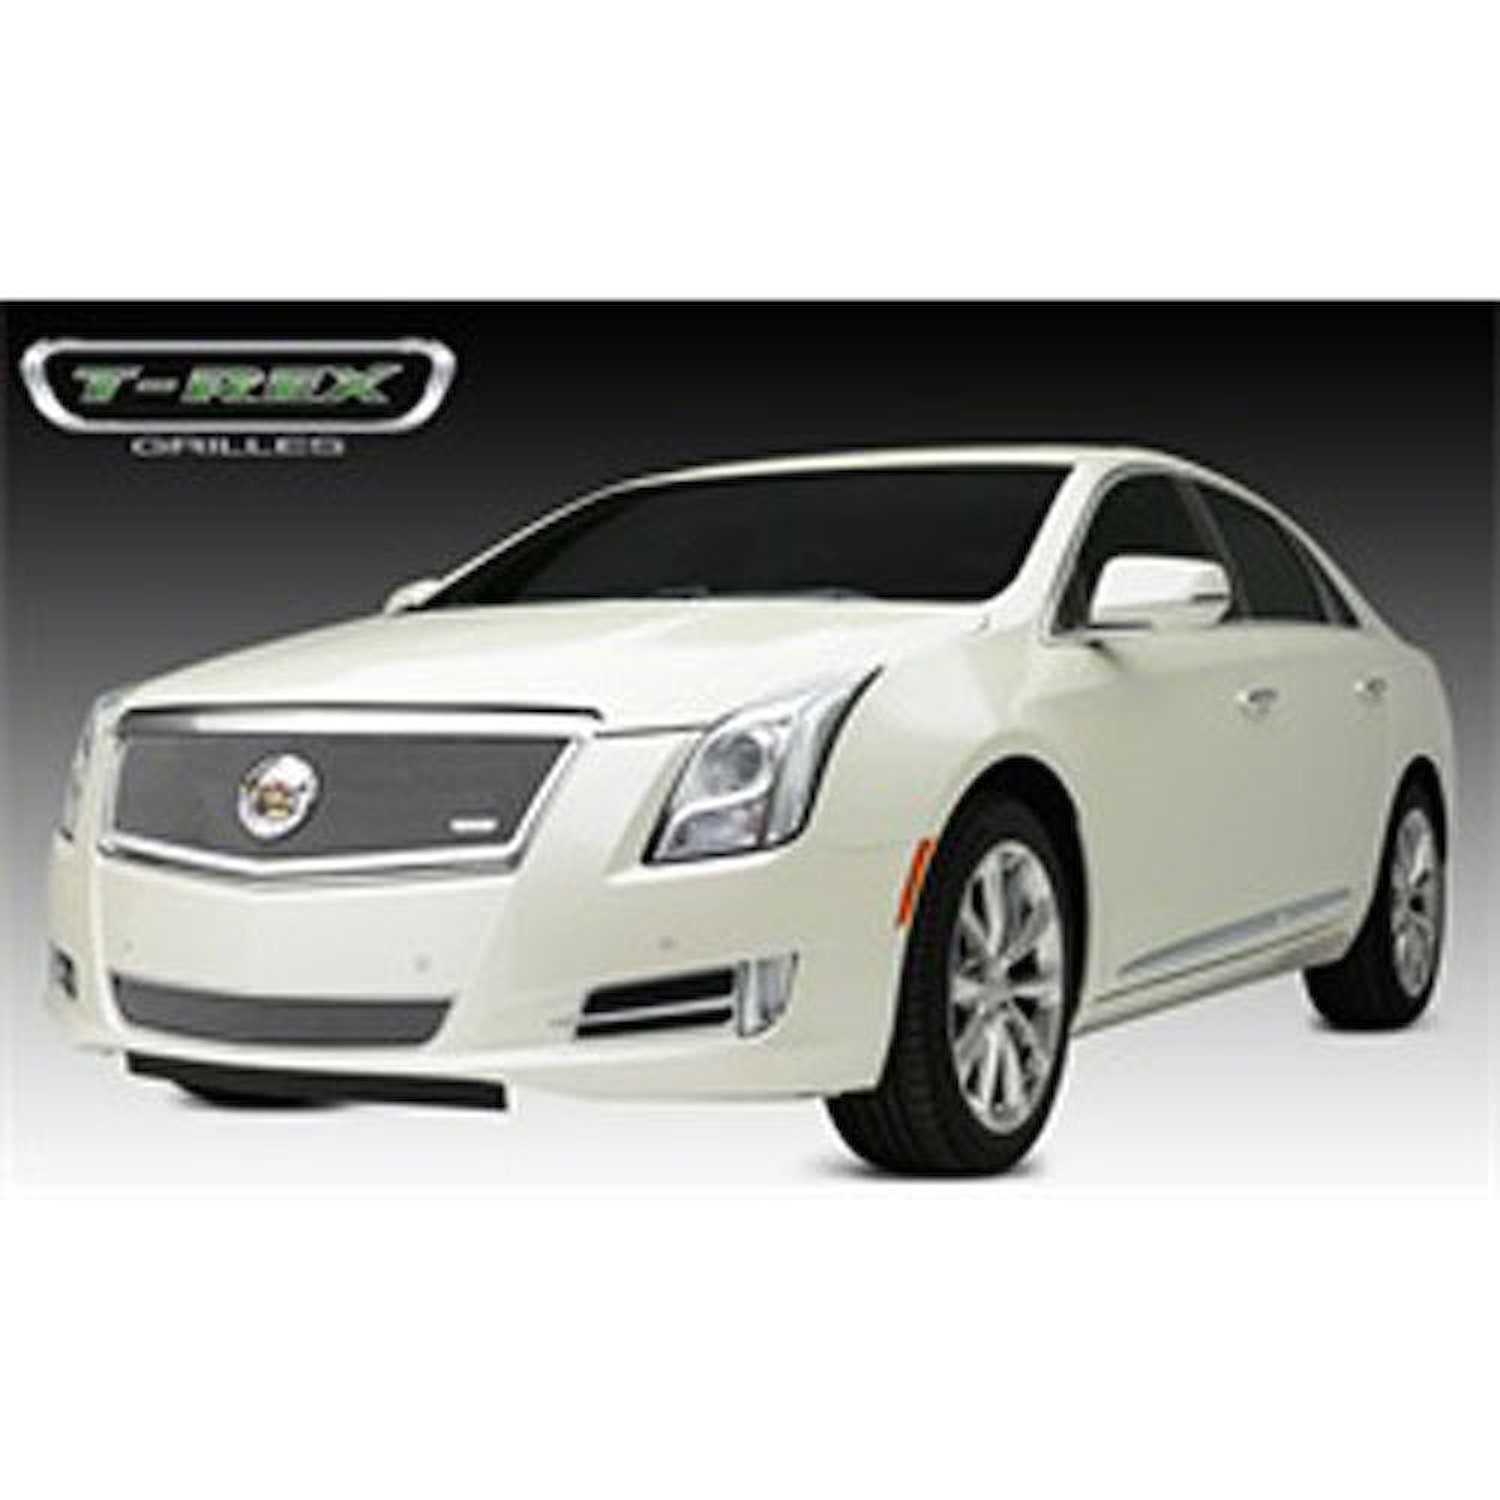 Upper Class Mesh Grille Overlay 2013-14 Cadillac XTS